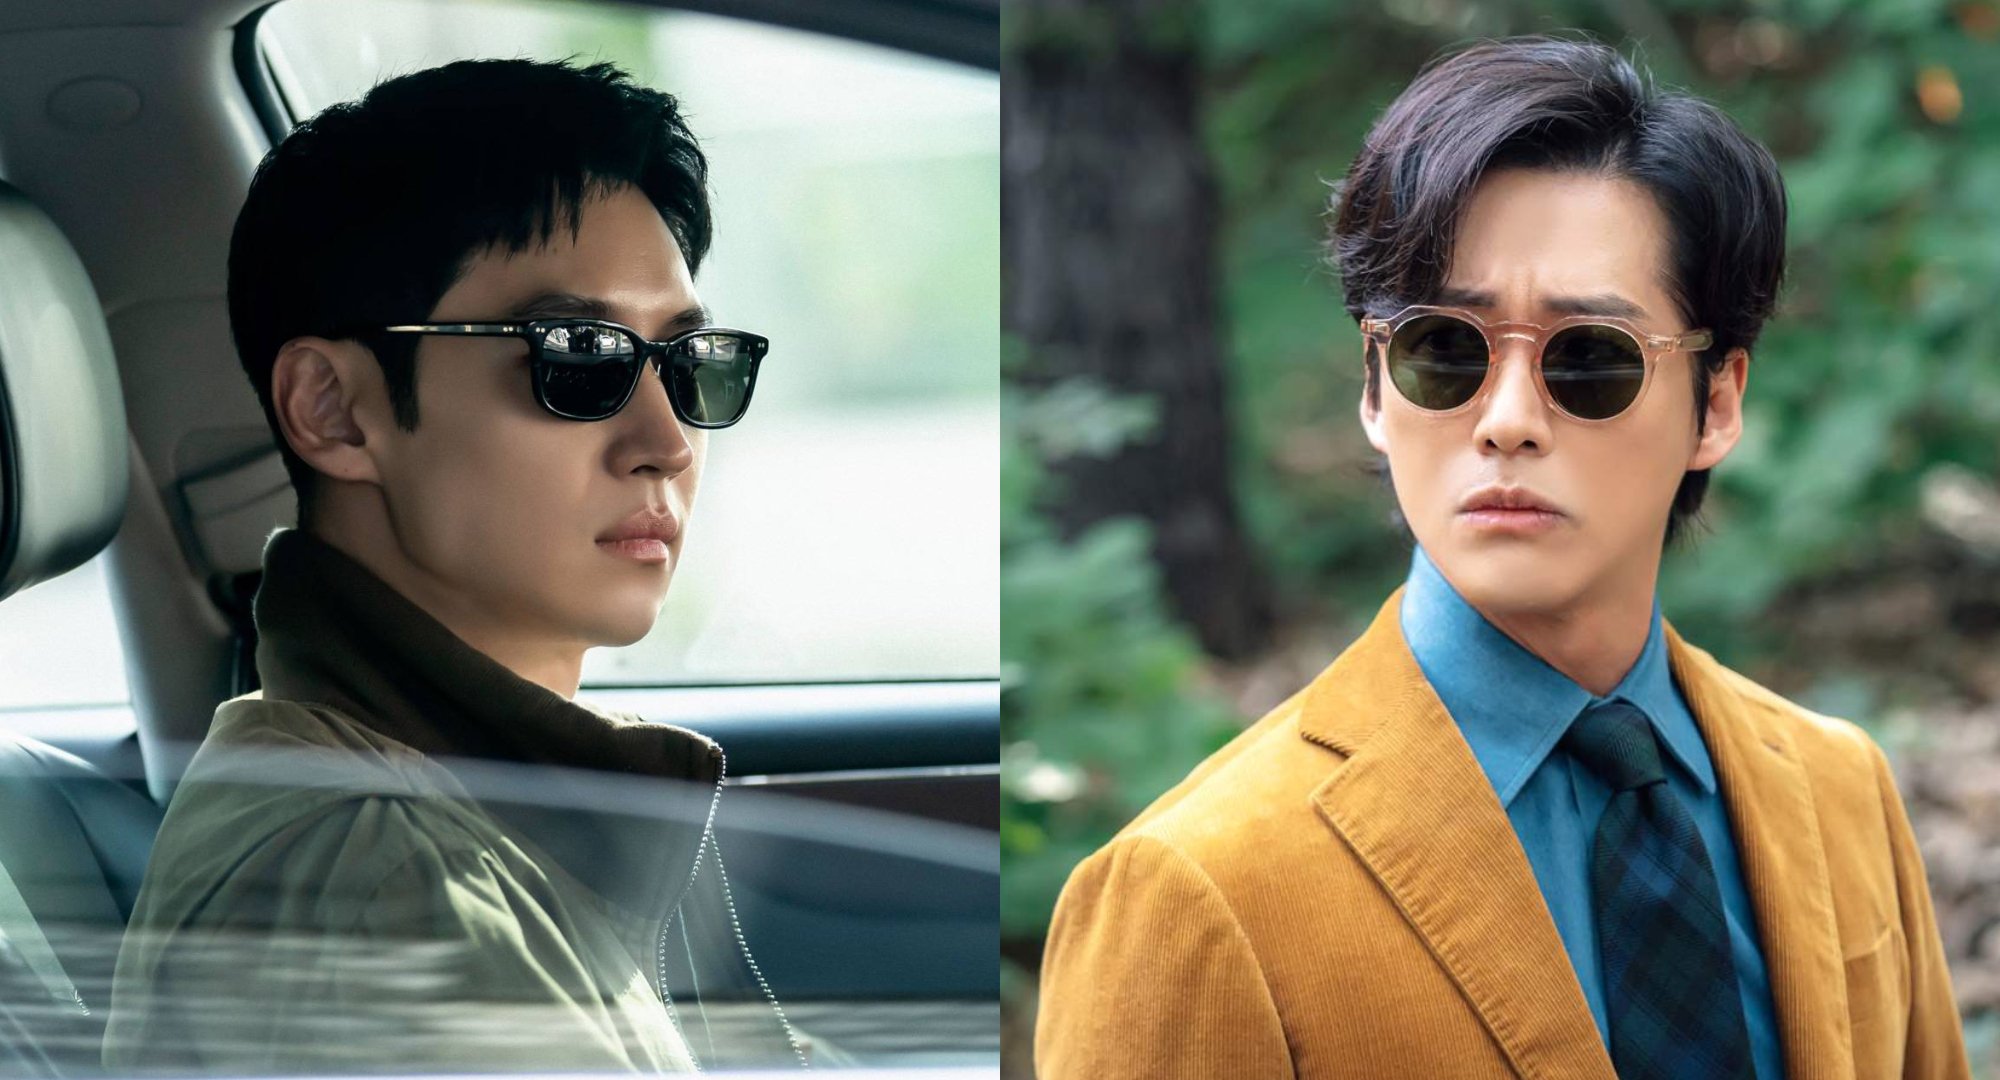 ‘Taxi Driver 2’ Episode 9 Will Have a Crossover With ‘One Dollar Lawyer’ K-Drama